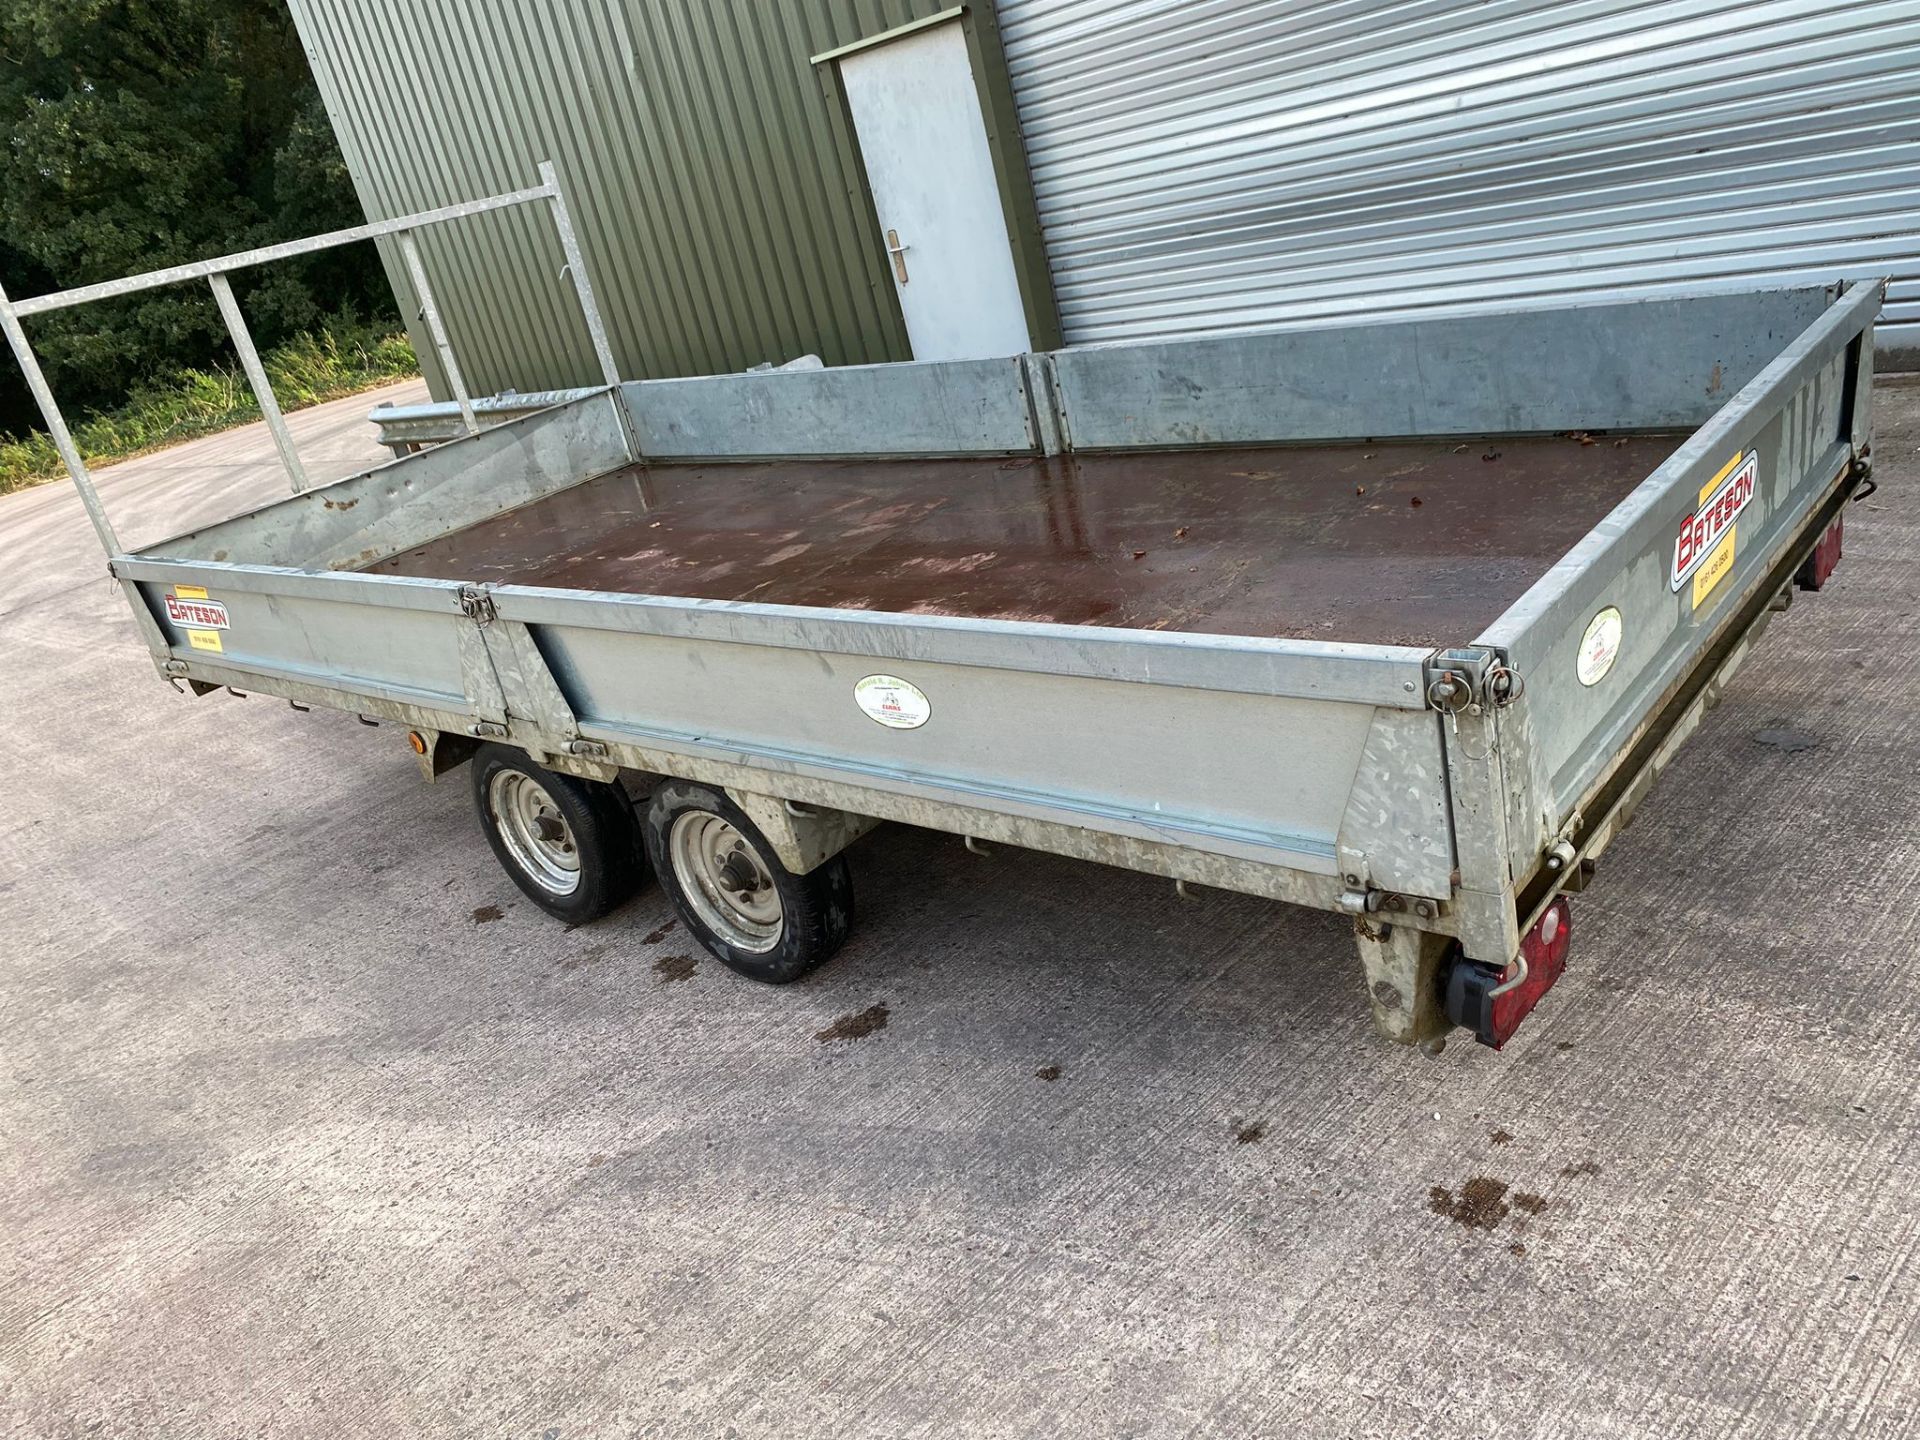 2007 BATESON TRAILER - IN VERY GOOD CONDITION WITH RAMPS, BRAKES ALL WORK, LIGHTS ALL WORK - Image 6 of 11